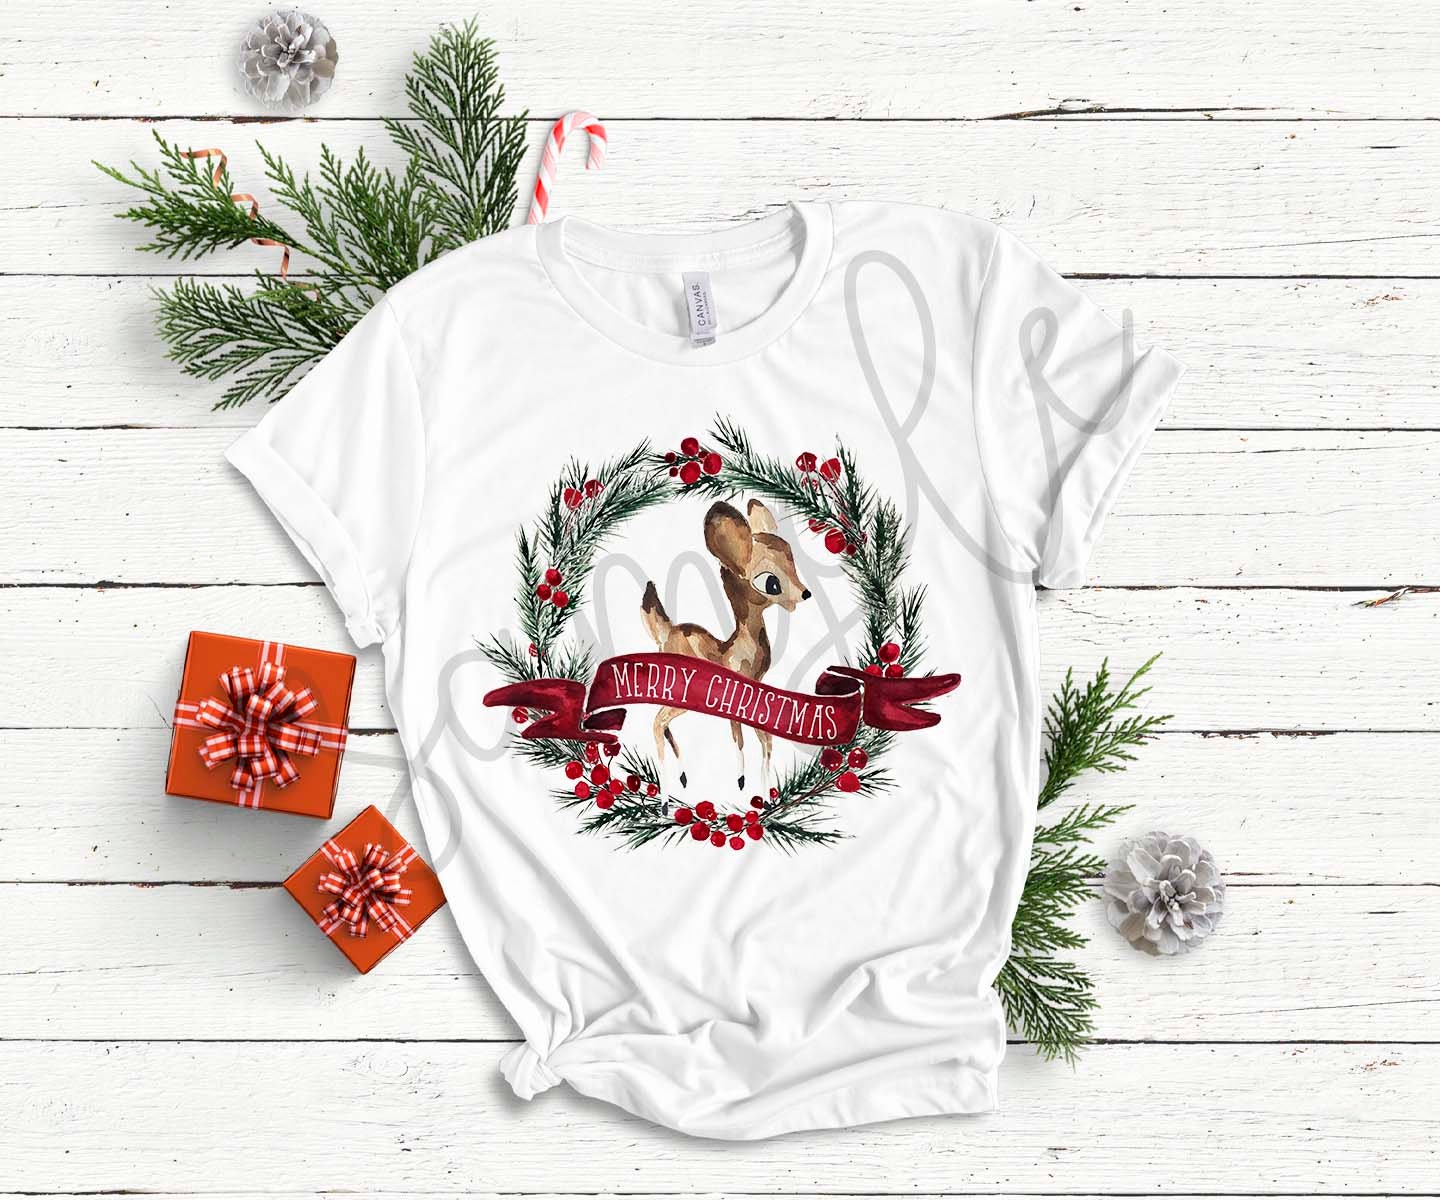 Christmas Sublimation Designs - Wreath and Deer Waterslide png Download- Christmas Wreath Clip Art - Watercolor Sublimation Design